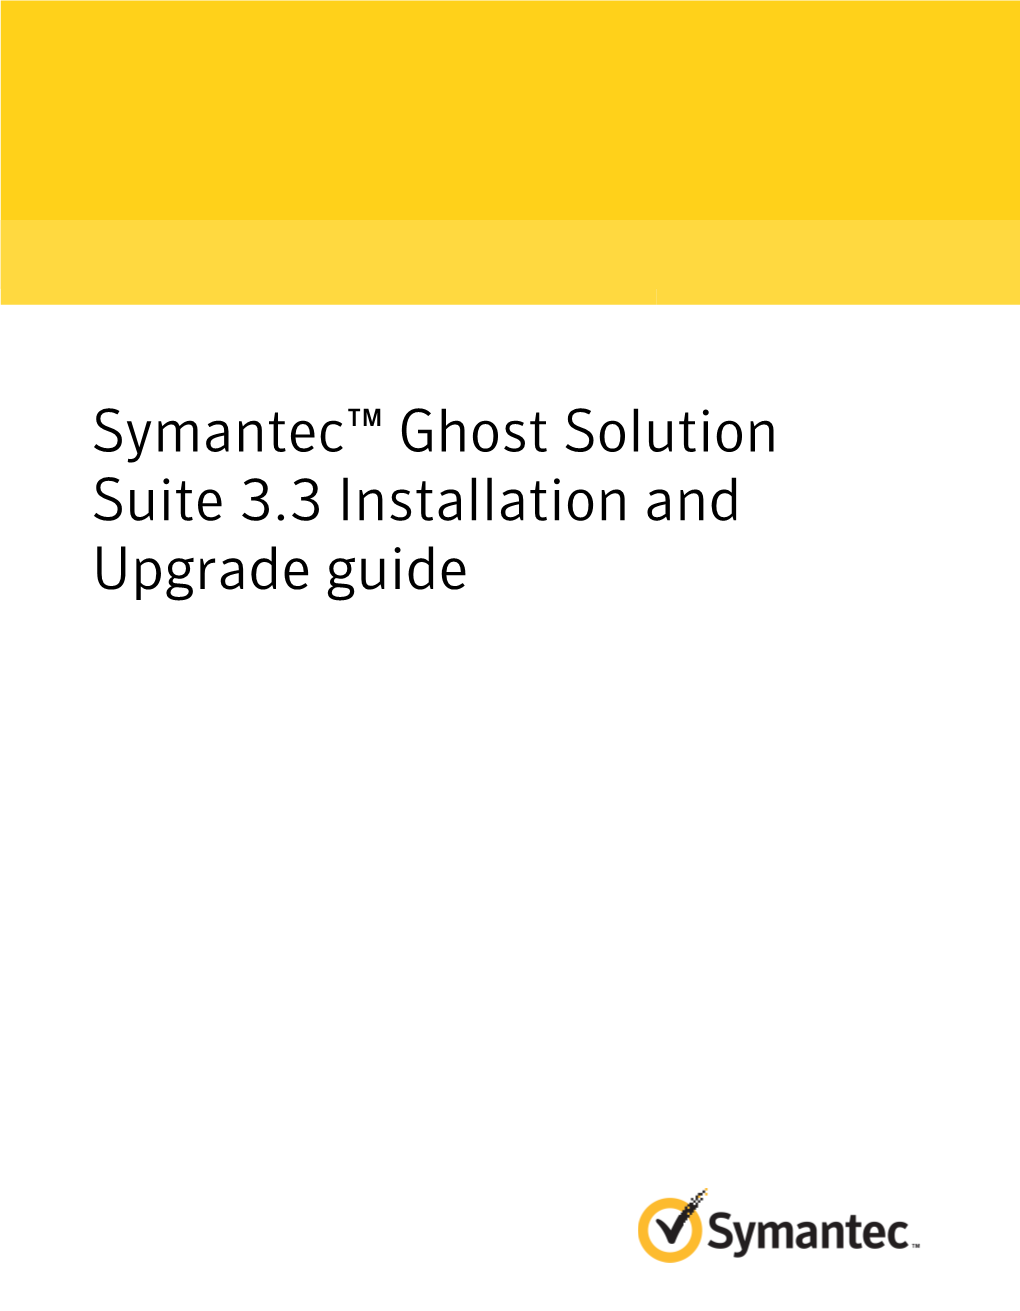 Symantec™ Ghost Solution Suite 3.3 Installation and Upgrade Guide Symantec™ Ghost Solution Suite 3.3 Installation and Upgrade Guide